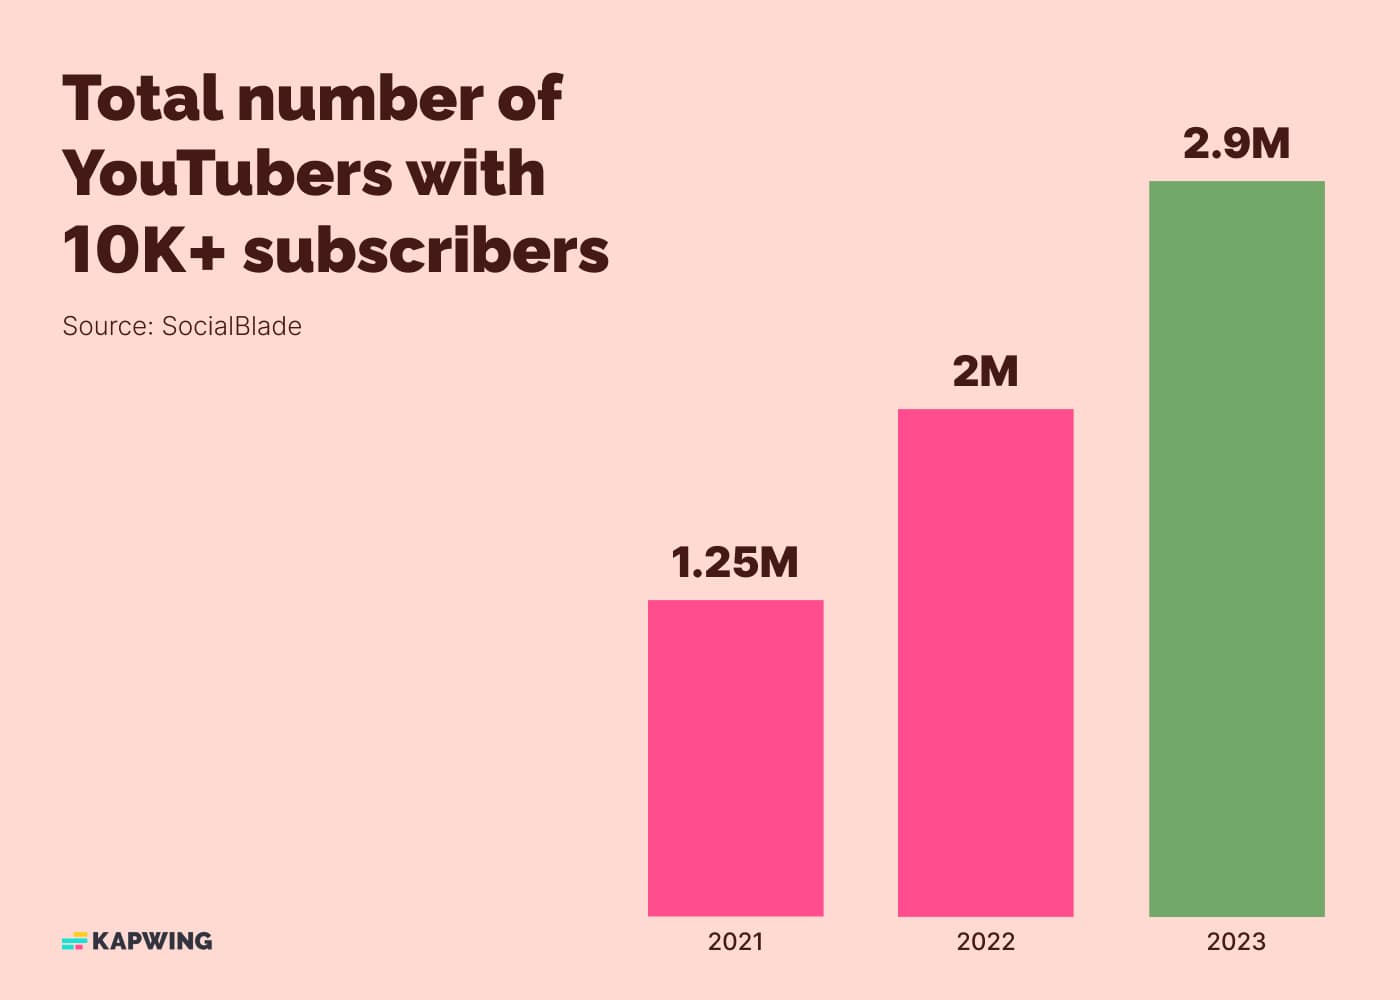 Bar graph showing the number of YouTubers with more than 10,000 subscribers. In 2023, there were 2.9 million YouTube channels with over ten thousand subscribers. In 2022, there were around 2 million. In 2021, there were around 1.5 million. This data is from SocialBlade